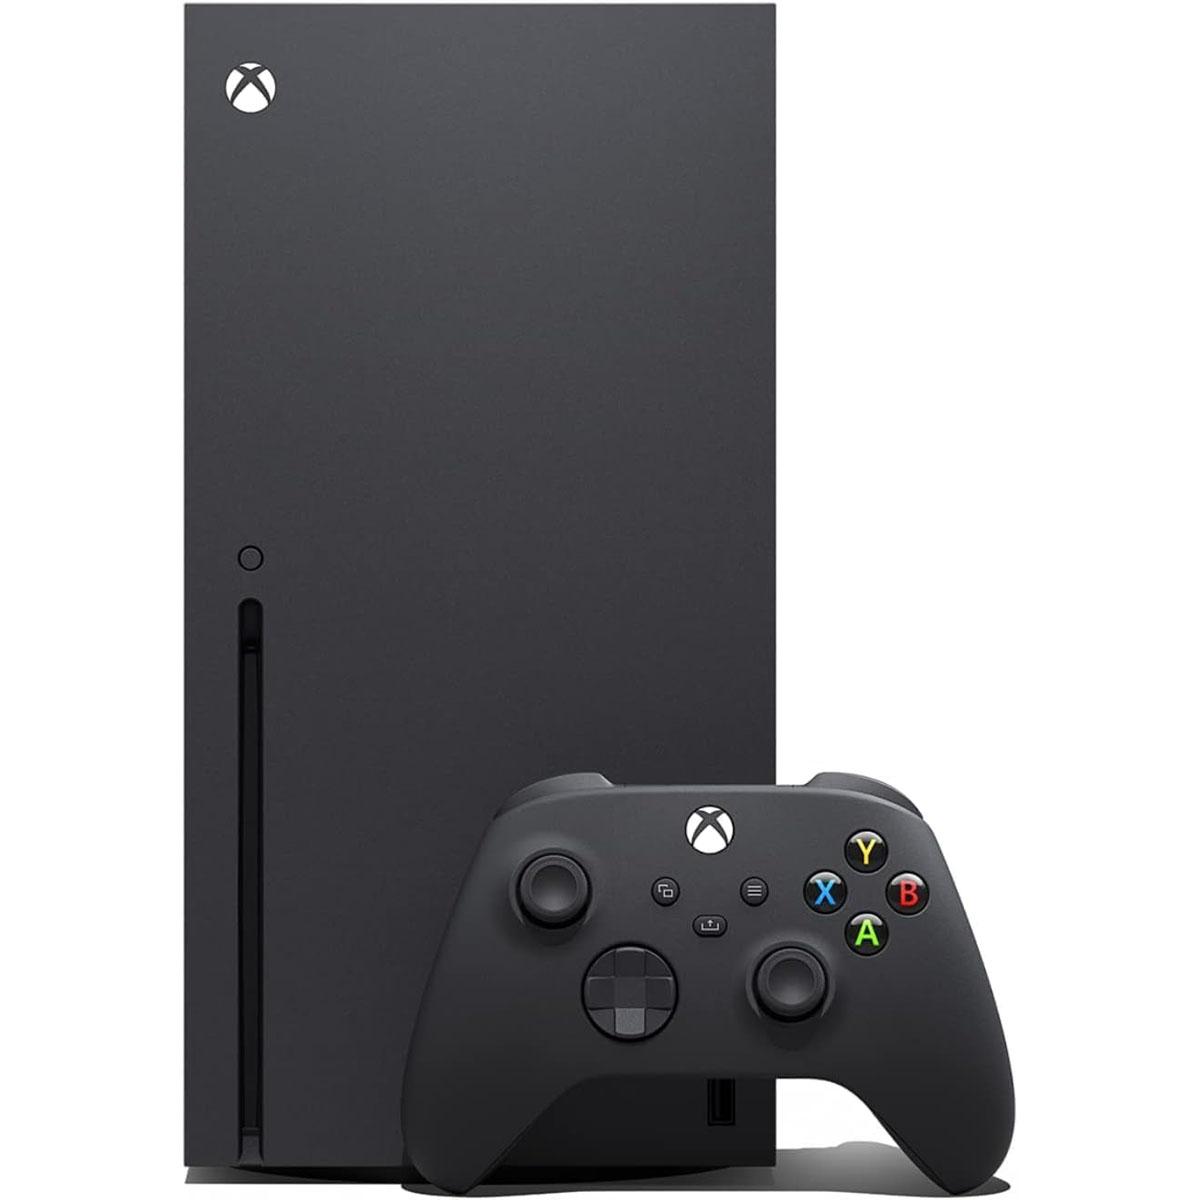 1TB Microsoft Xbox Series X Console Refurbished for $399.99 Shipped